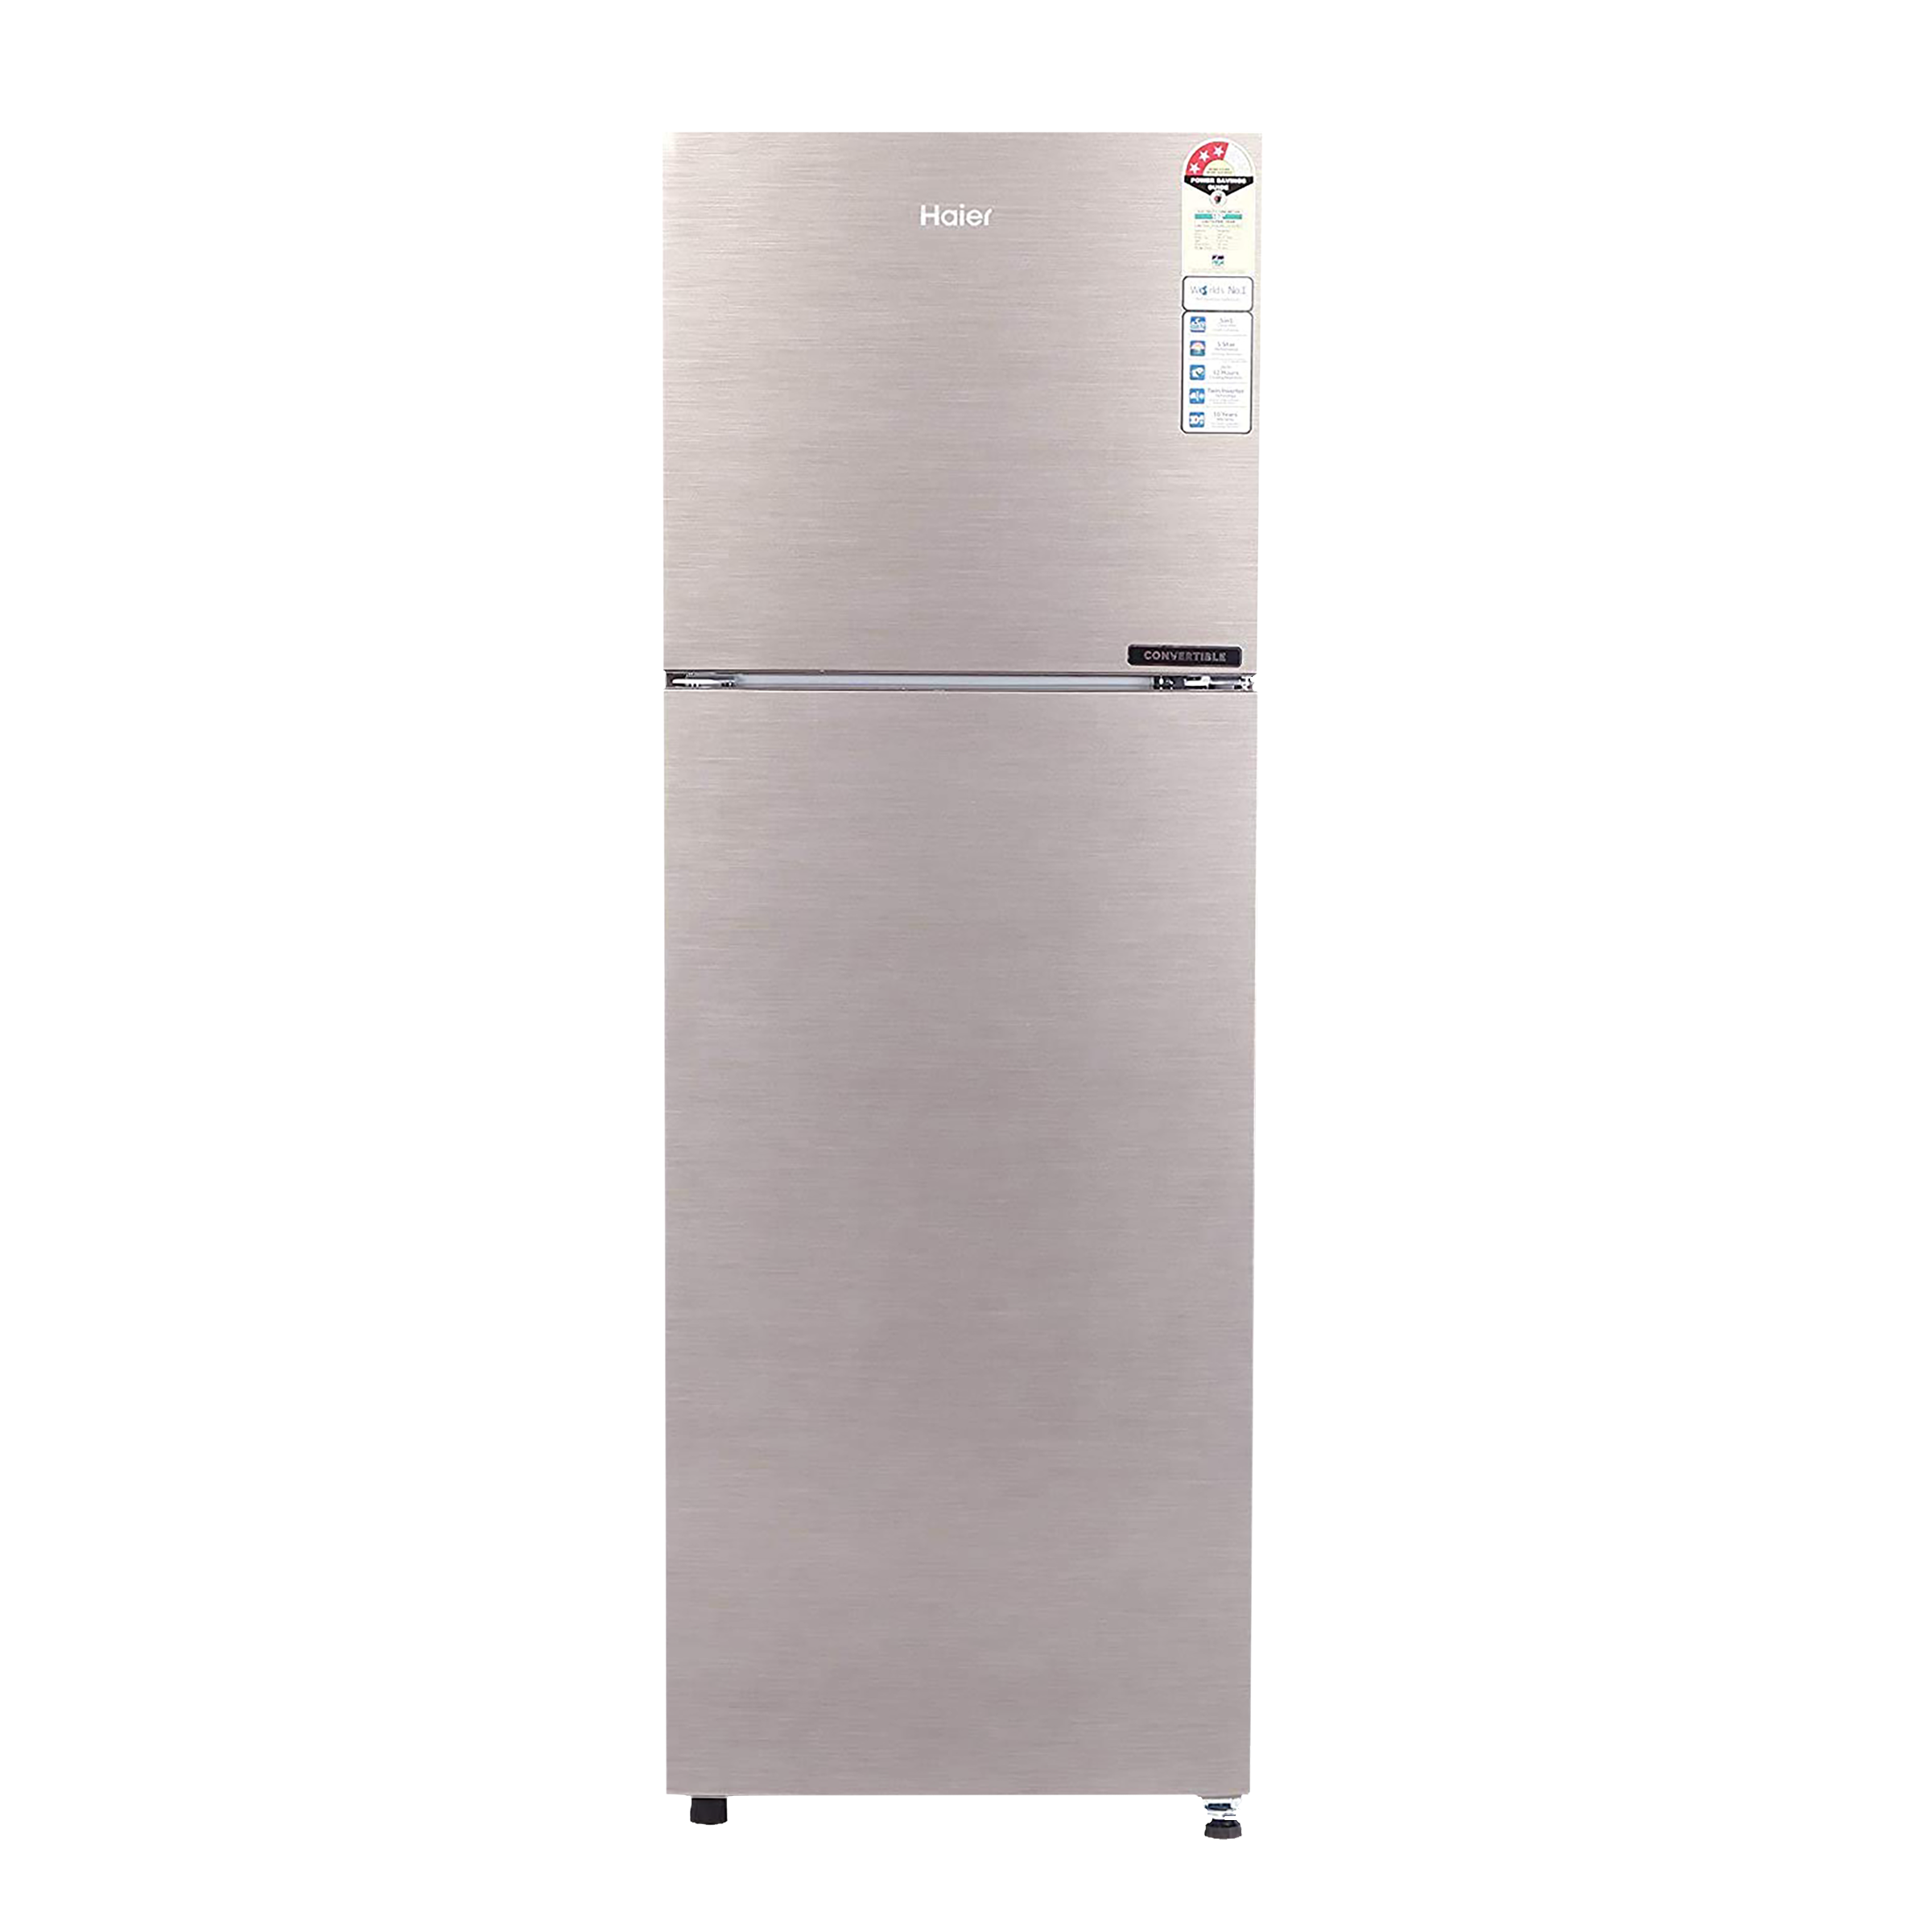 Haier 258 Litres 2 Star Frost Free Double Door Convertible Refrigerator with Turbo Icing Technology (HEF-25TDS, Dazzle Steel)_1